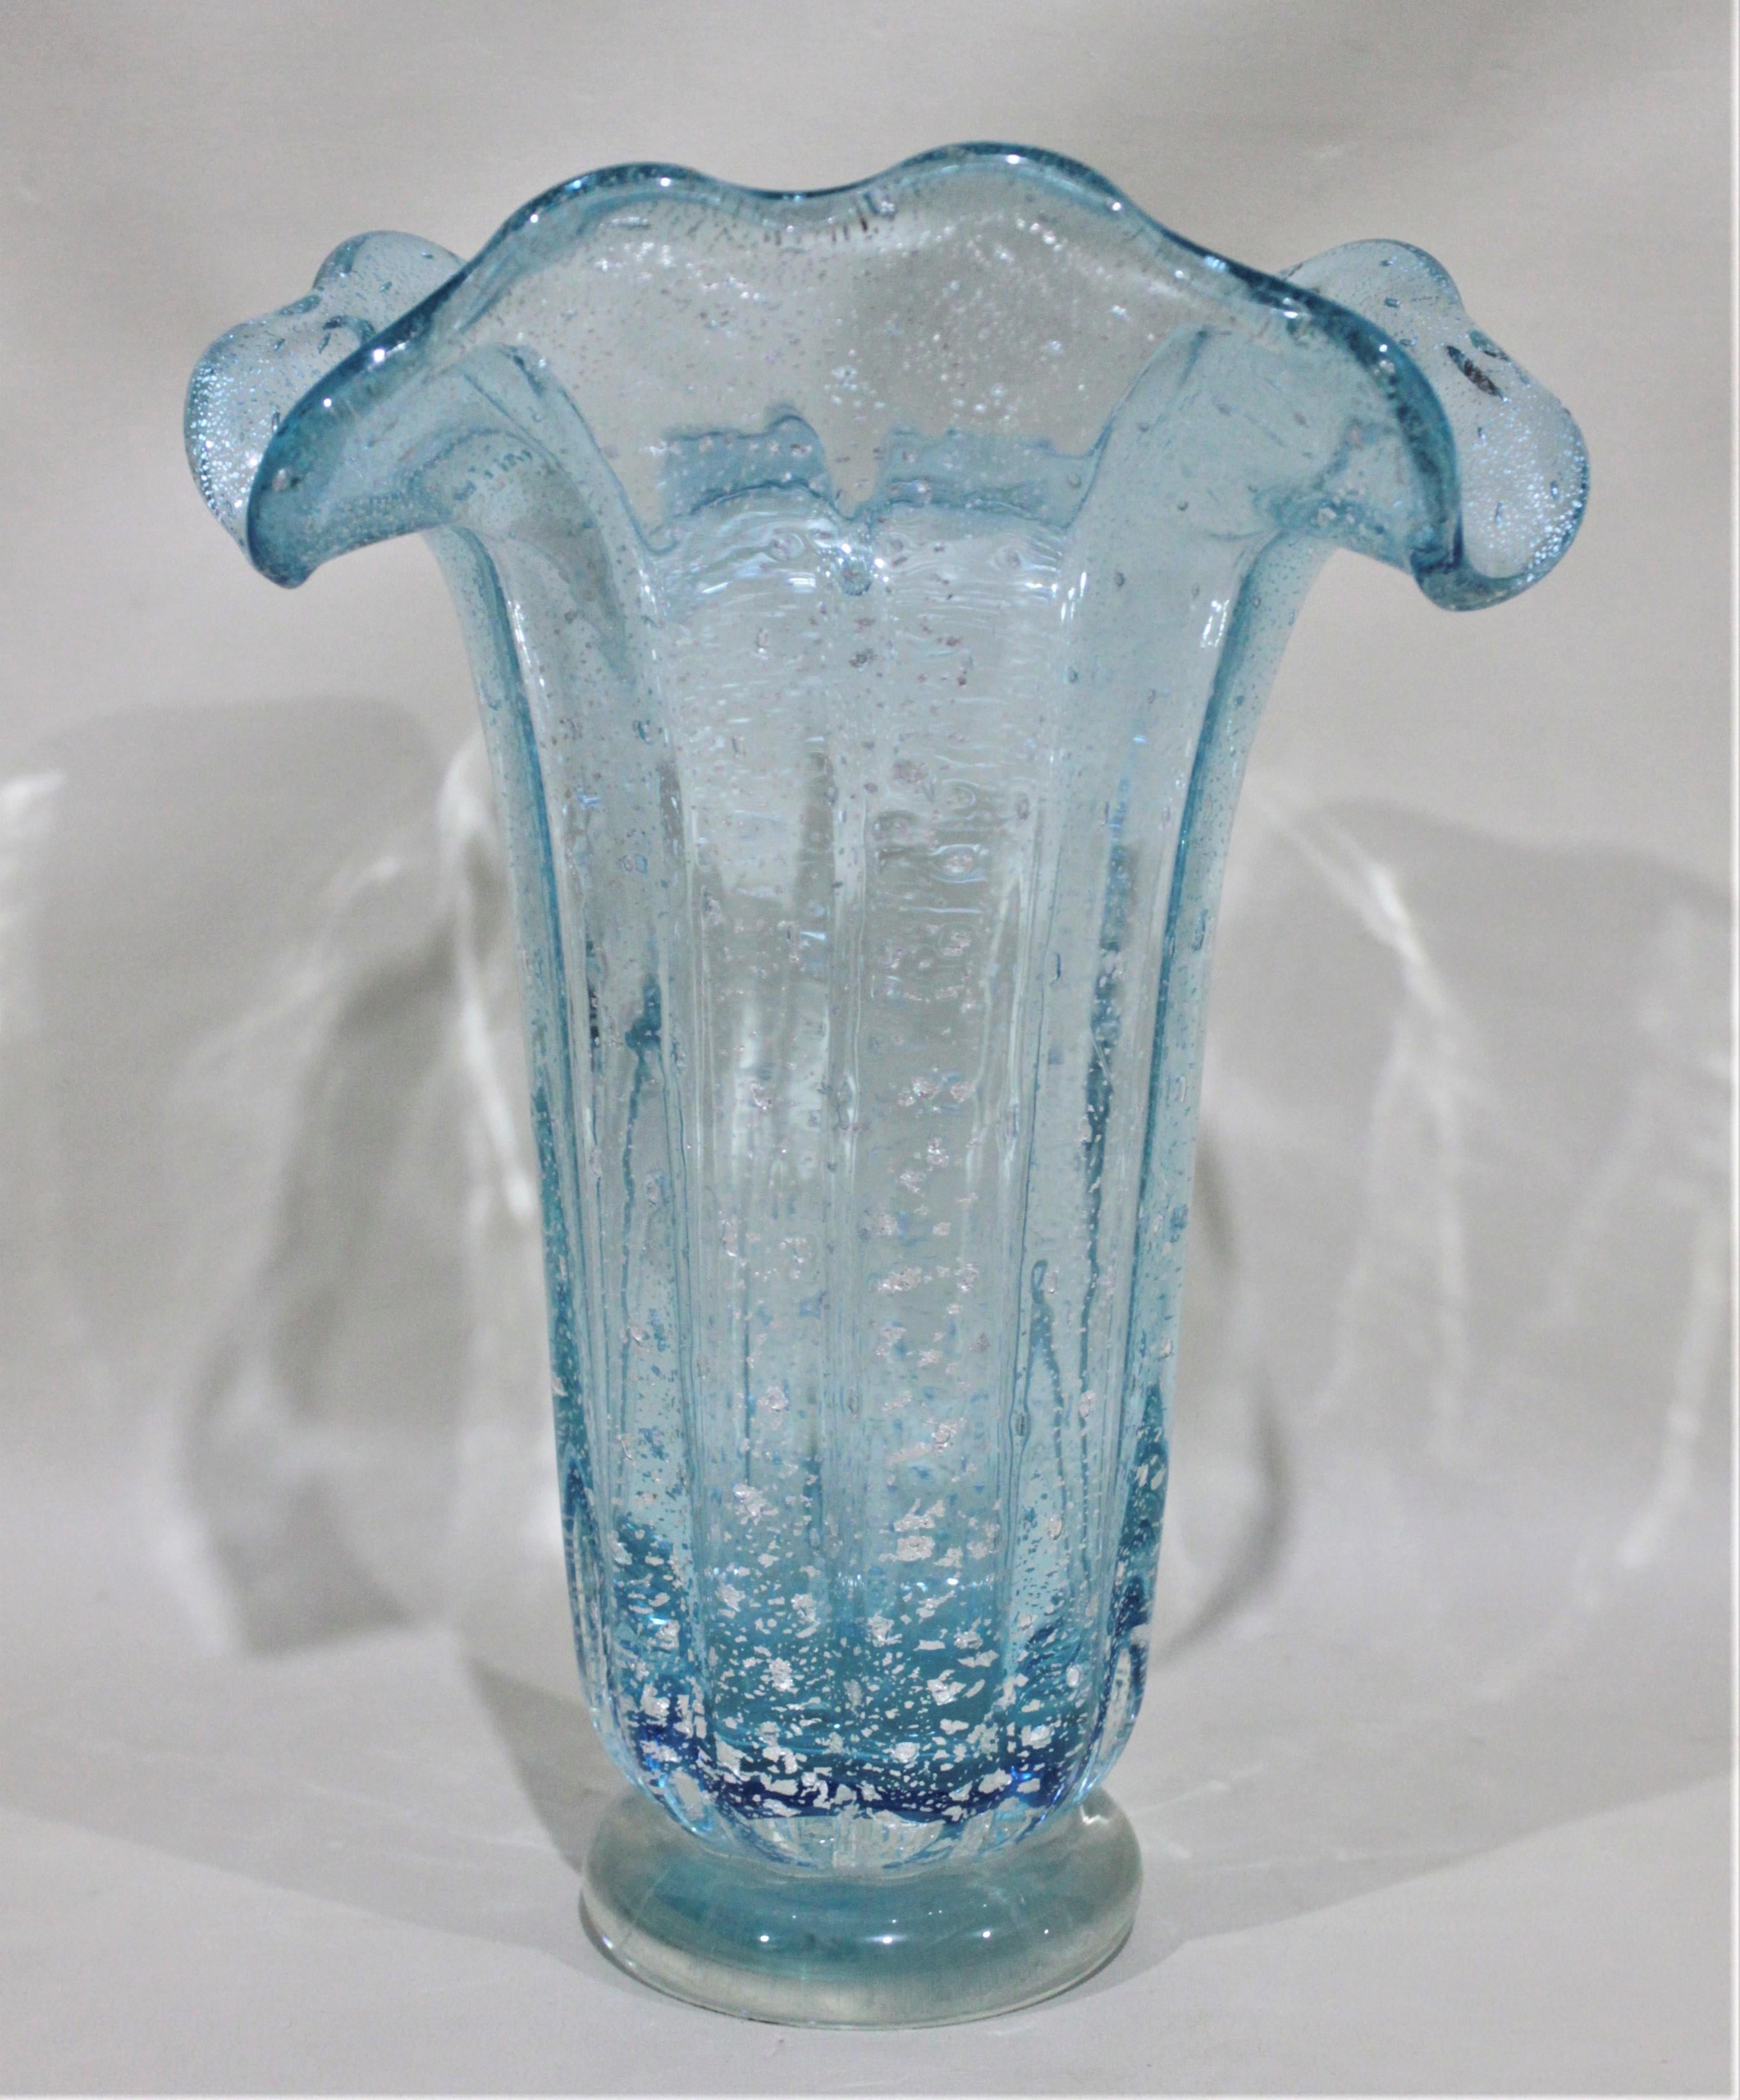 This Mid-Century Modern art glass vase has no markings, but it believed to have been made in Murano Italy and is consistent with the work of Barovier. This thick aqua blue vase has a round base and fluted top and is infused with silver flecks